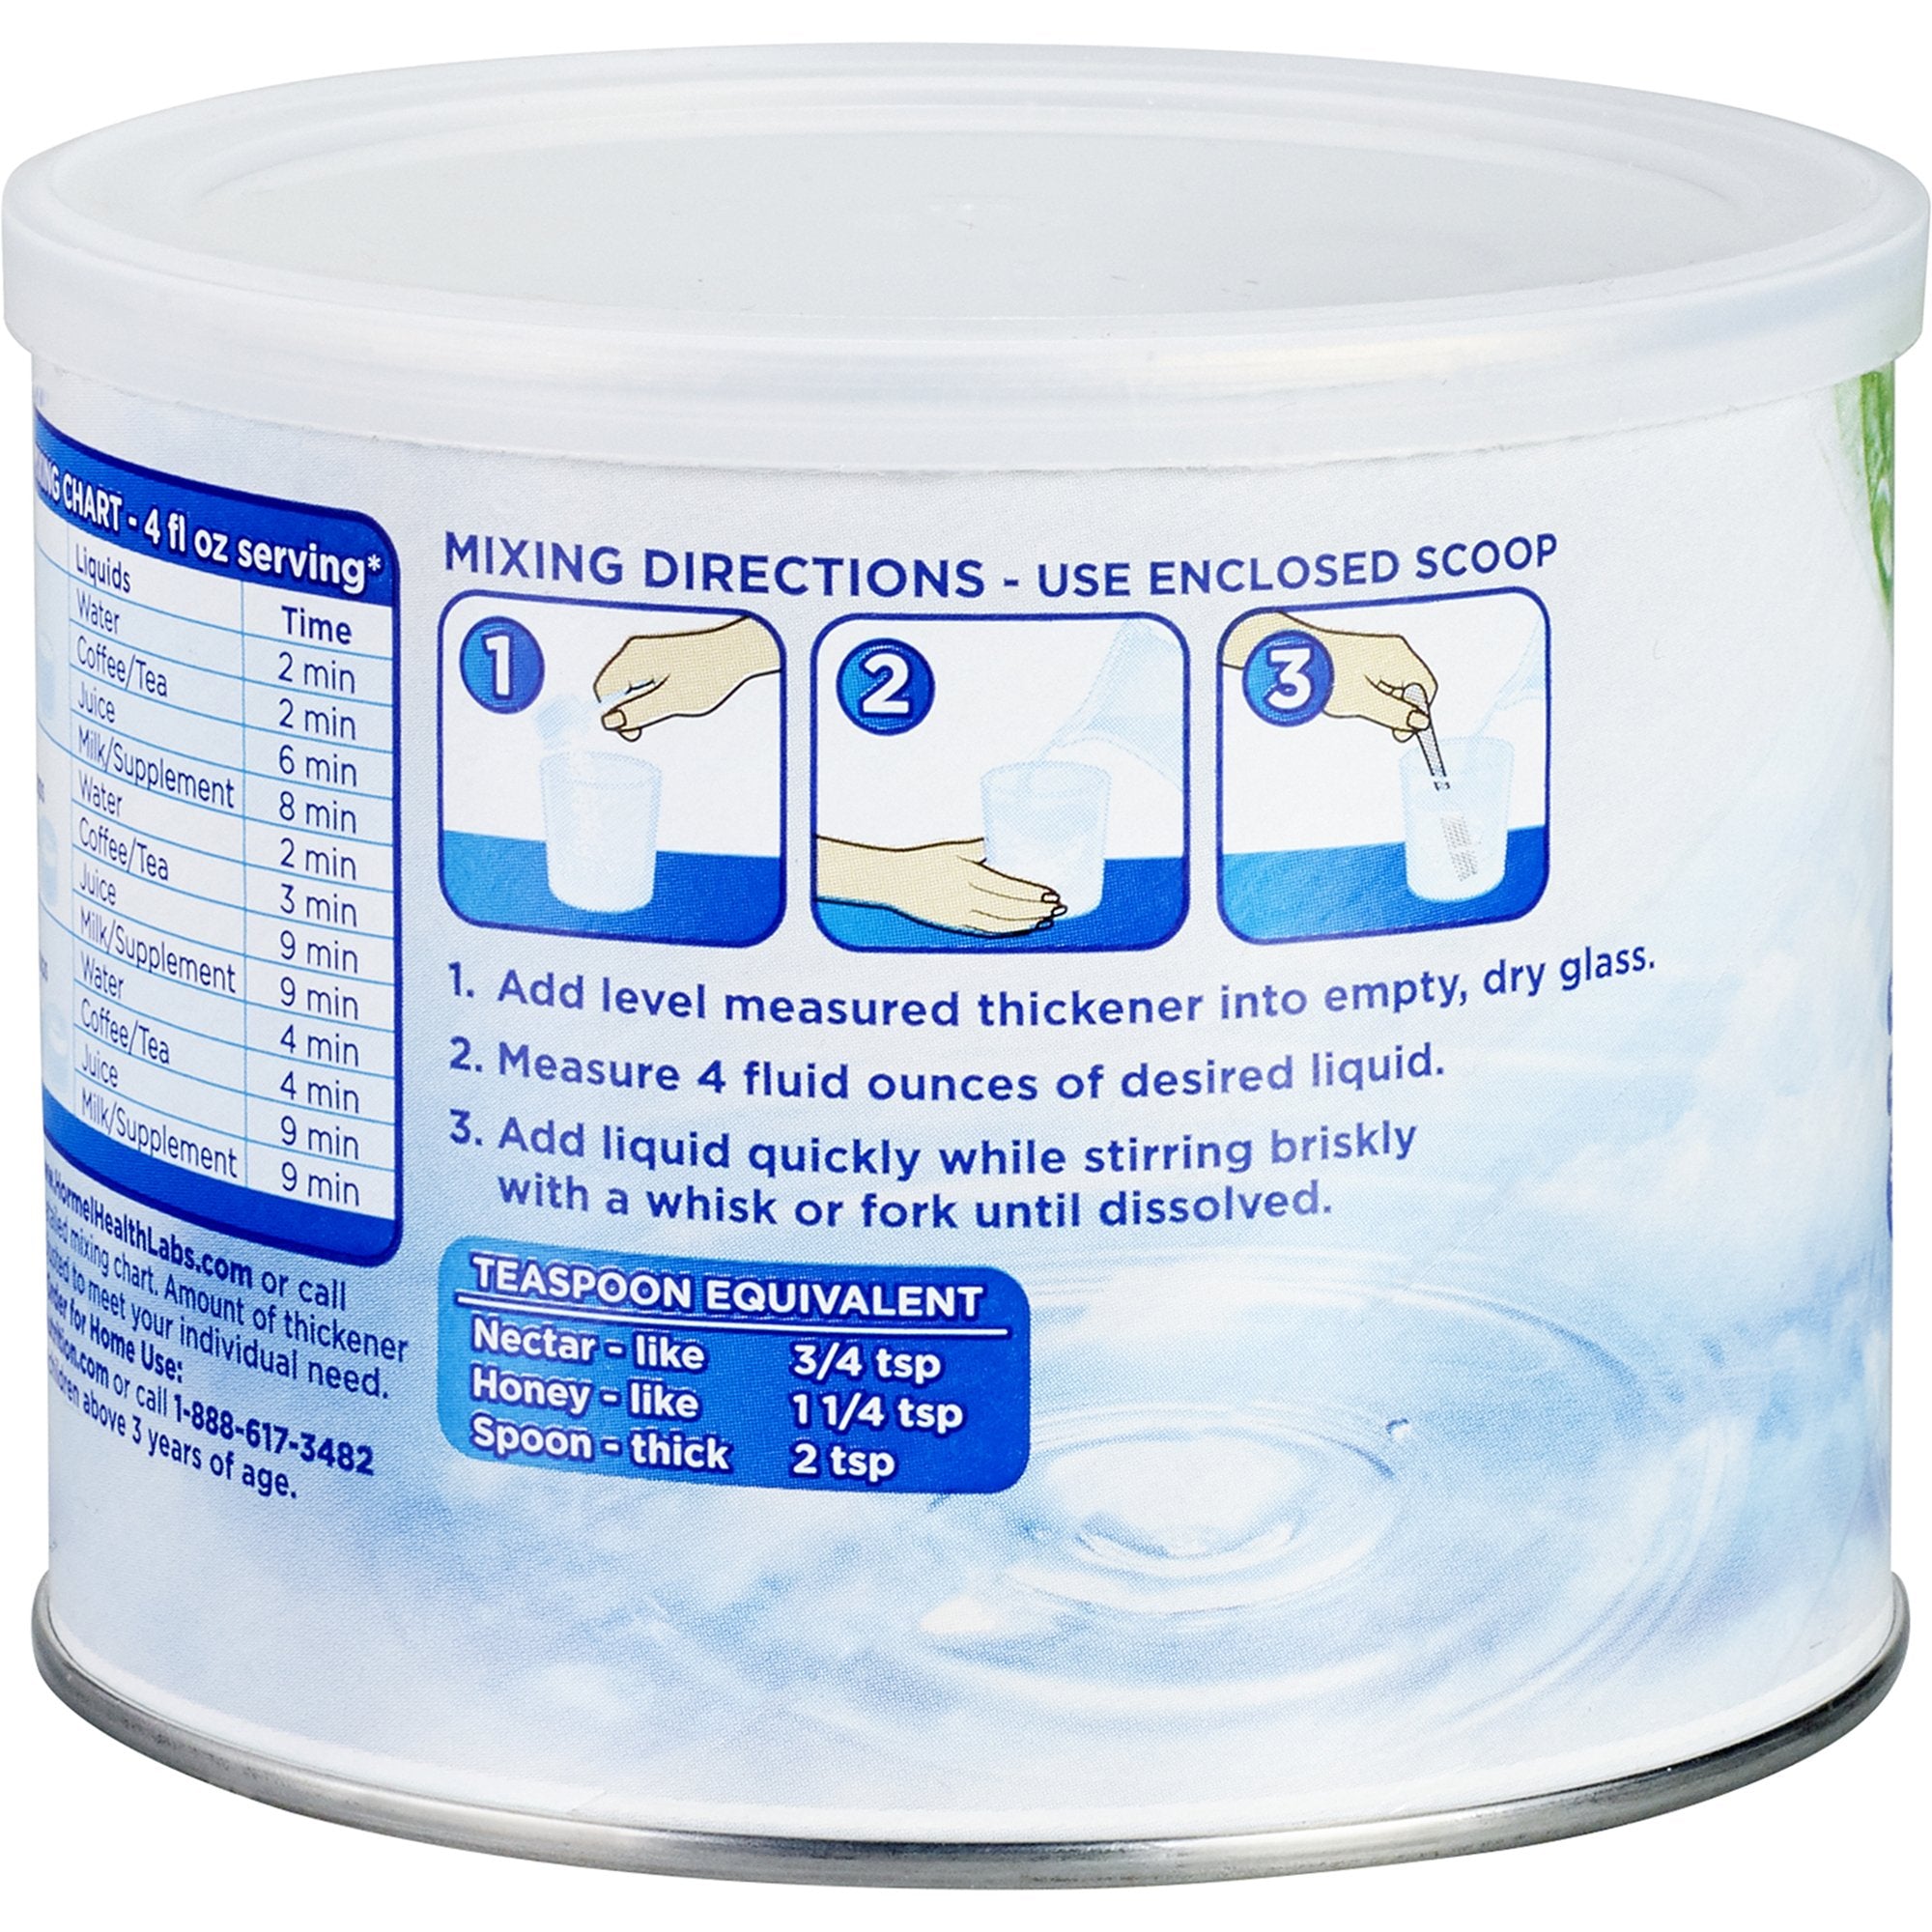 Food and Beverage Thickener Thick & Easy Clear 4.4 oz. Canister Unflavored Powder IDDSI Level 2 Mildly Thick